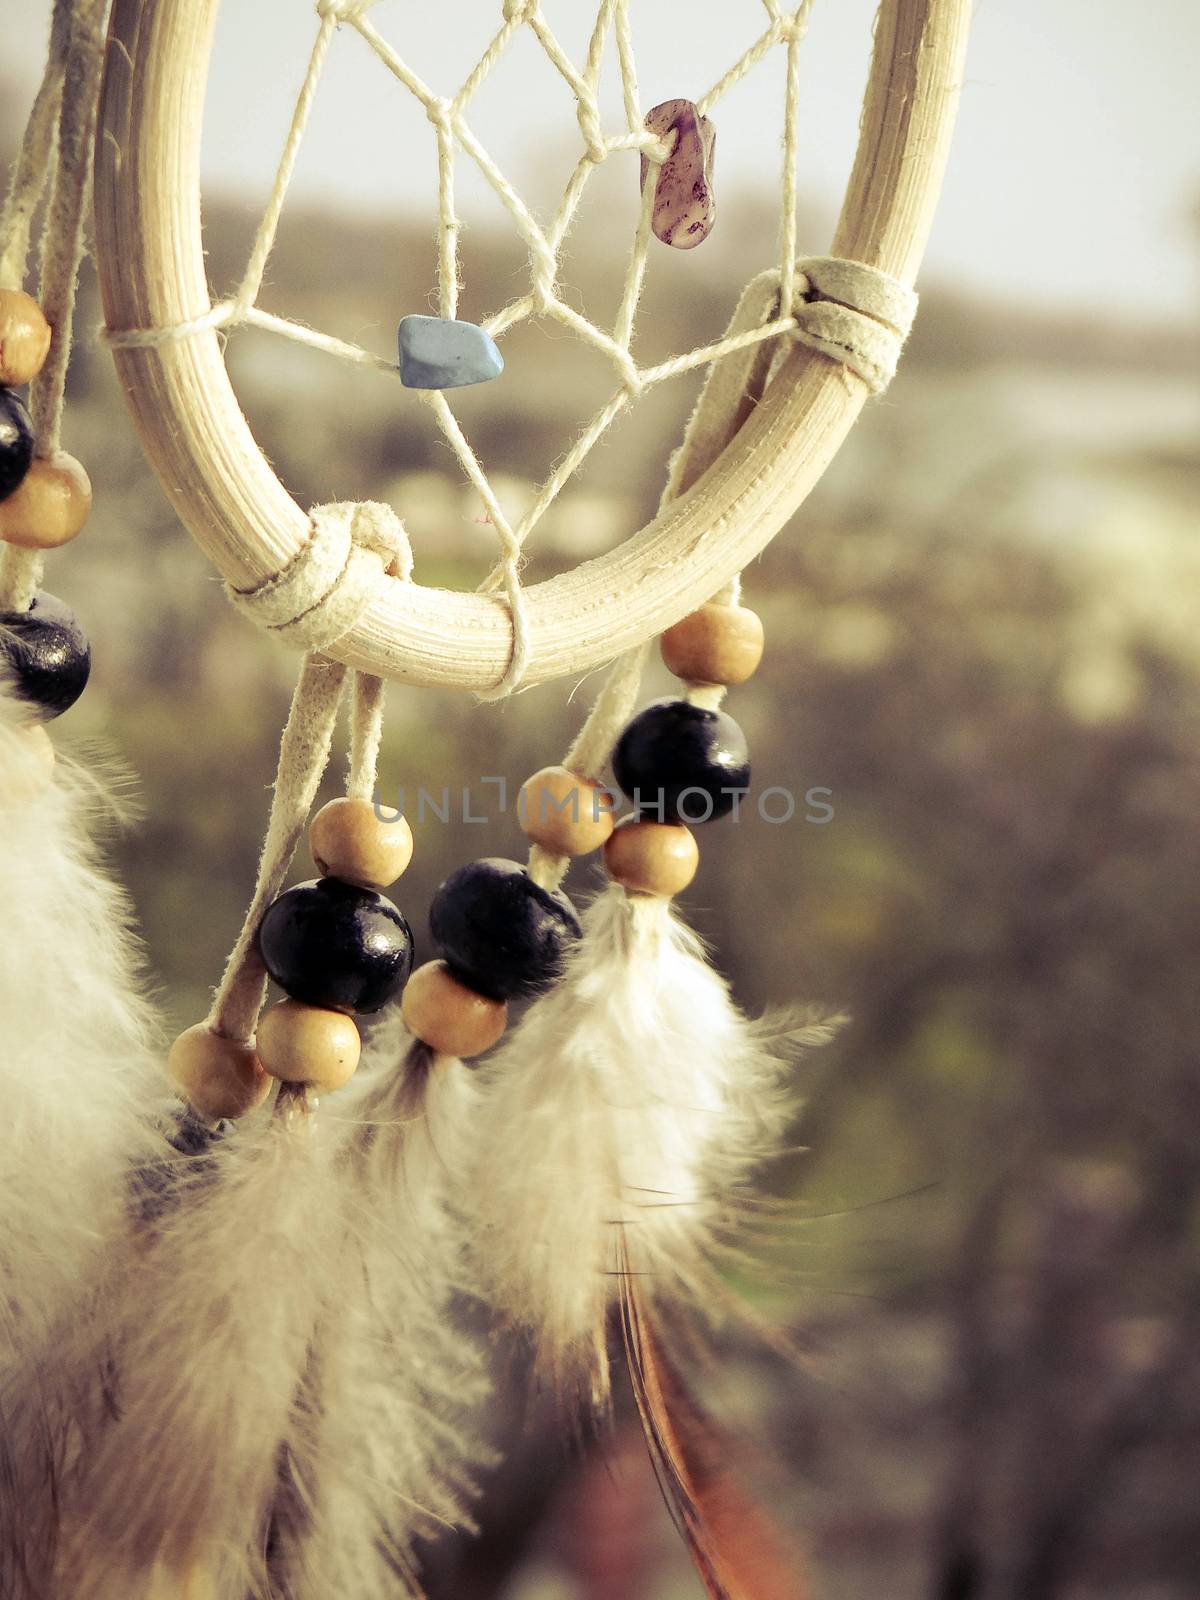 Wooden Dreamcatcher with feathers and beads by natali_brill